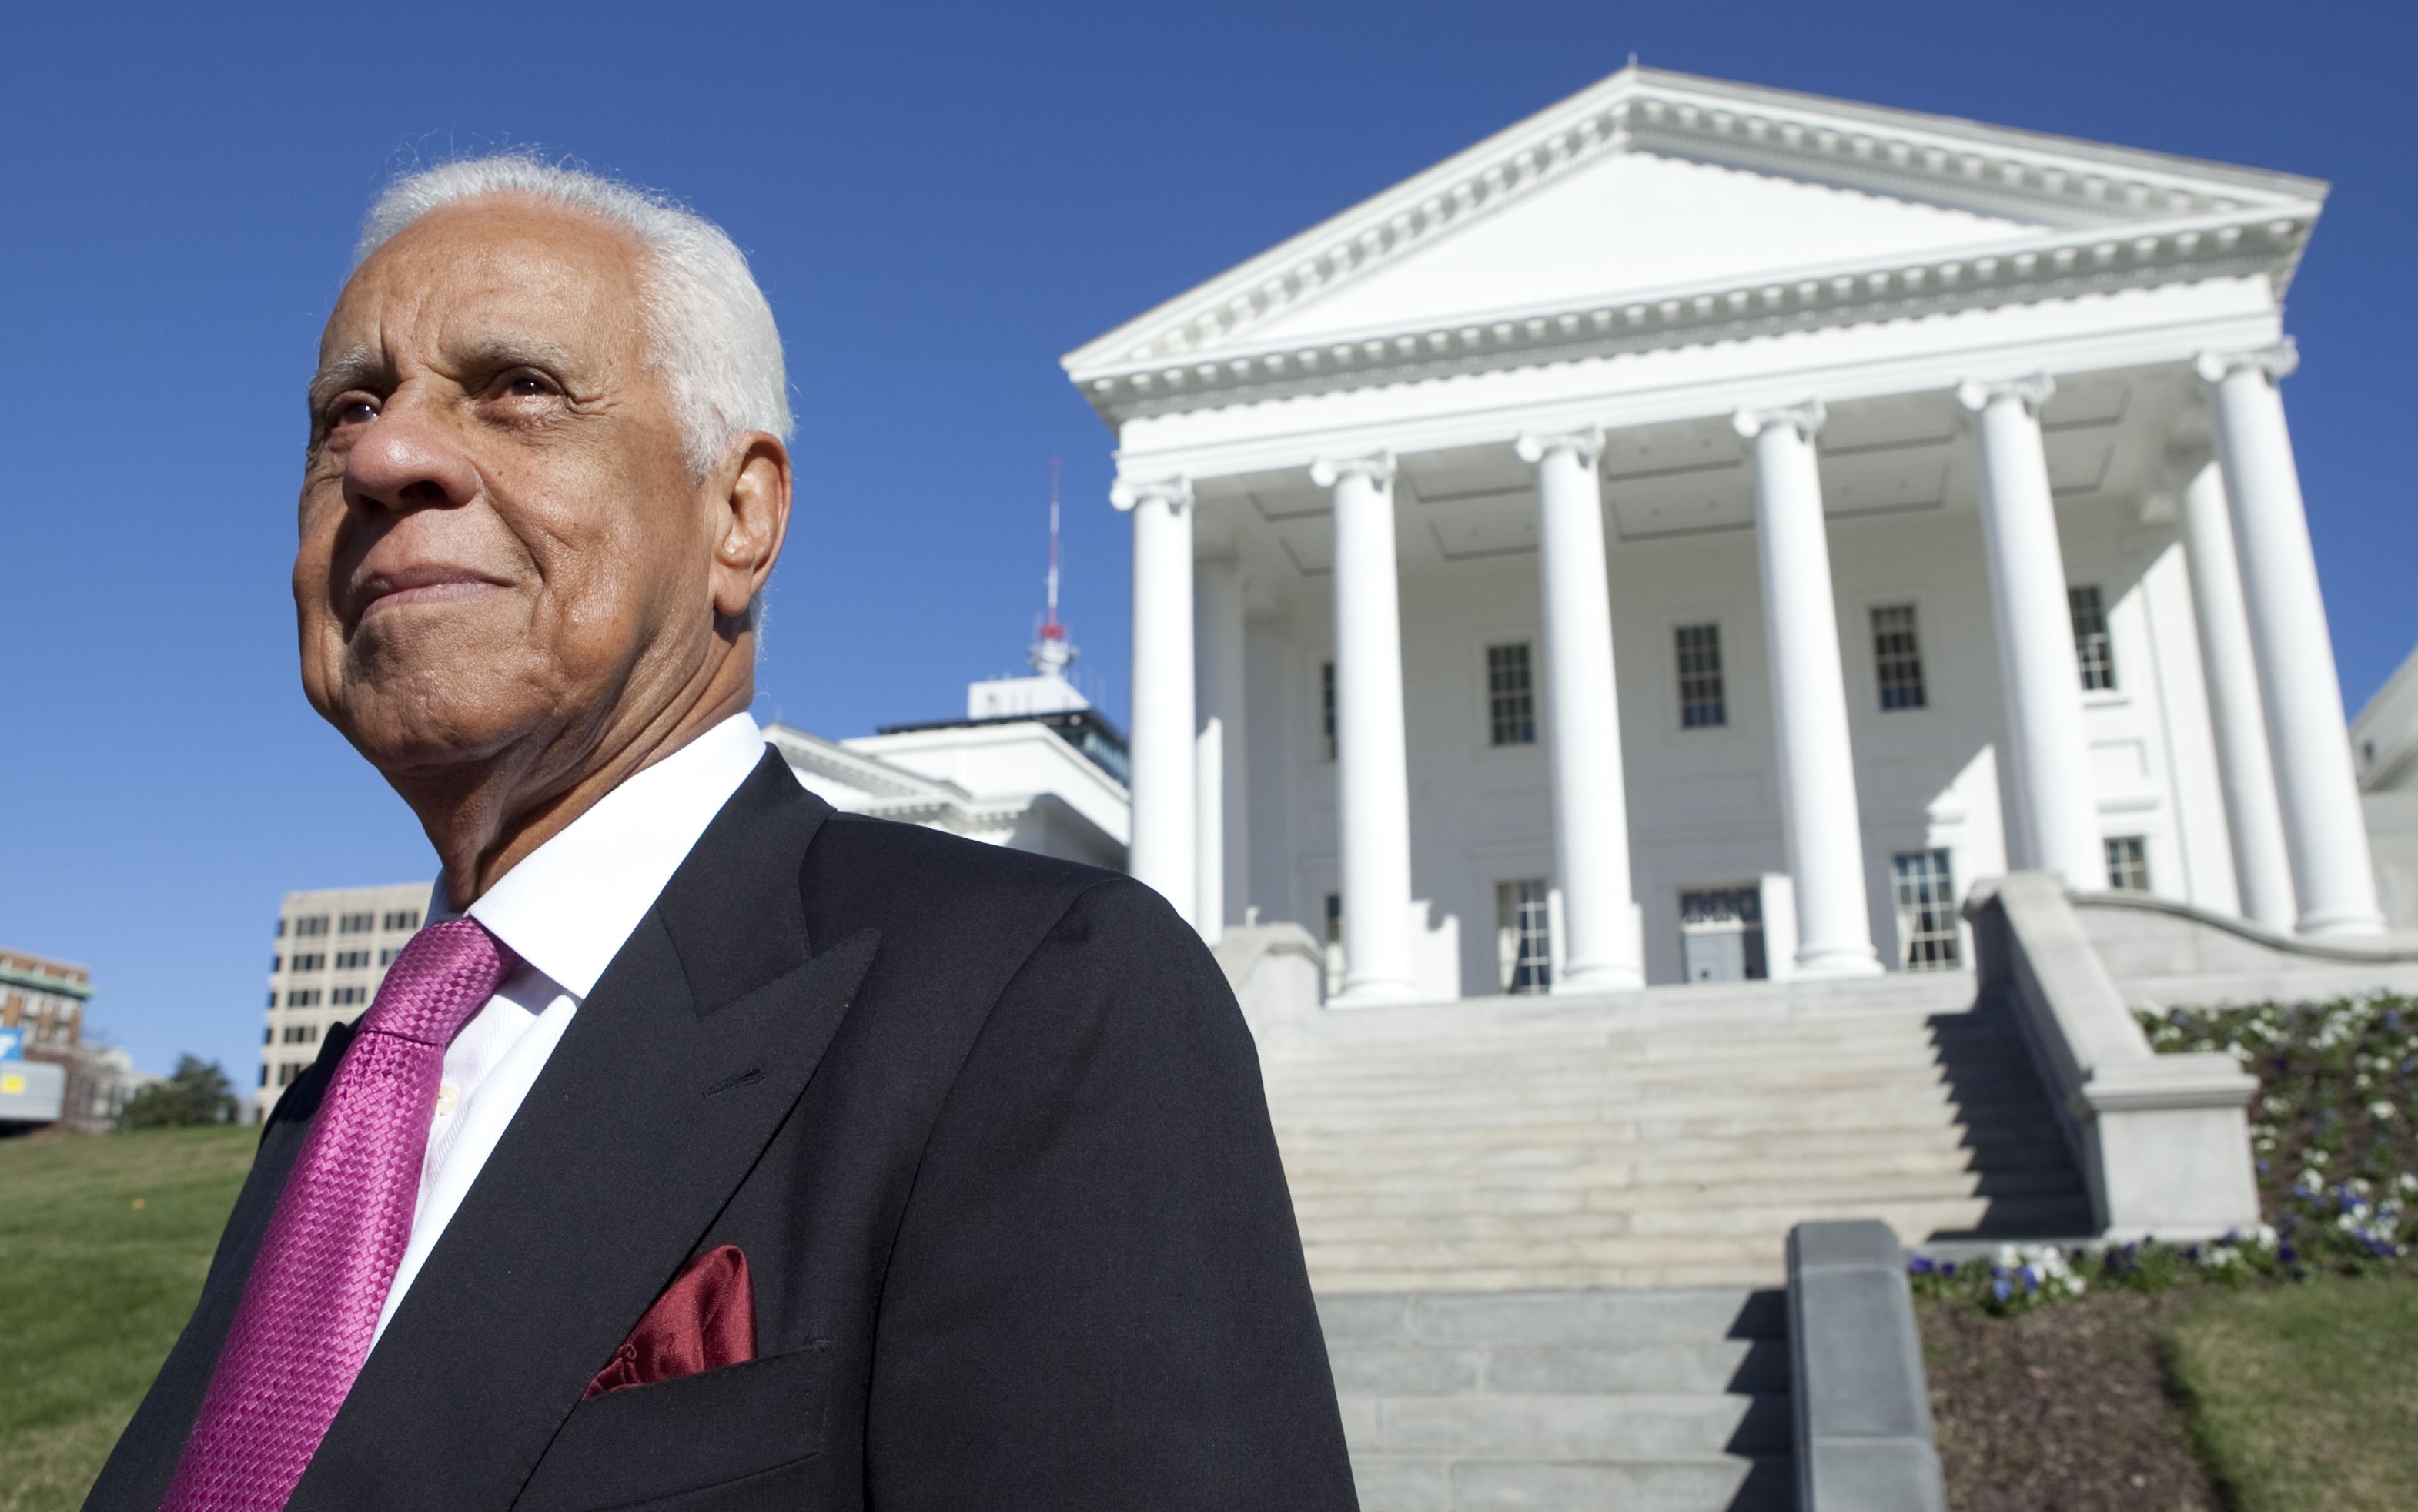 L. Douglas Wilder, the 66th Governor of Virginia and a distinguished member of the Wilder School faculty